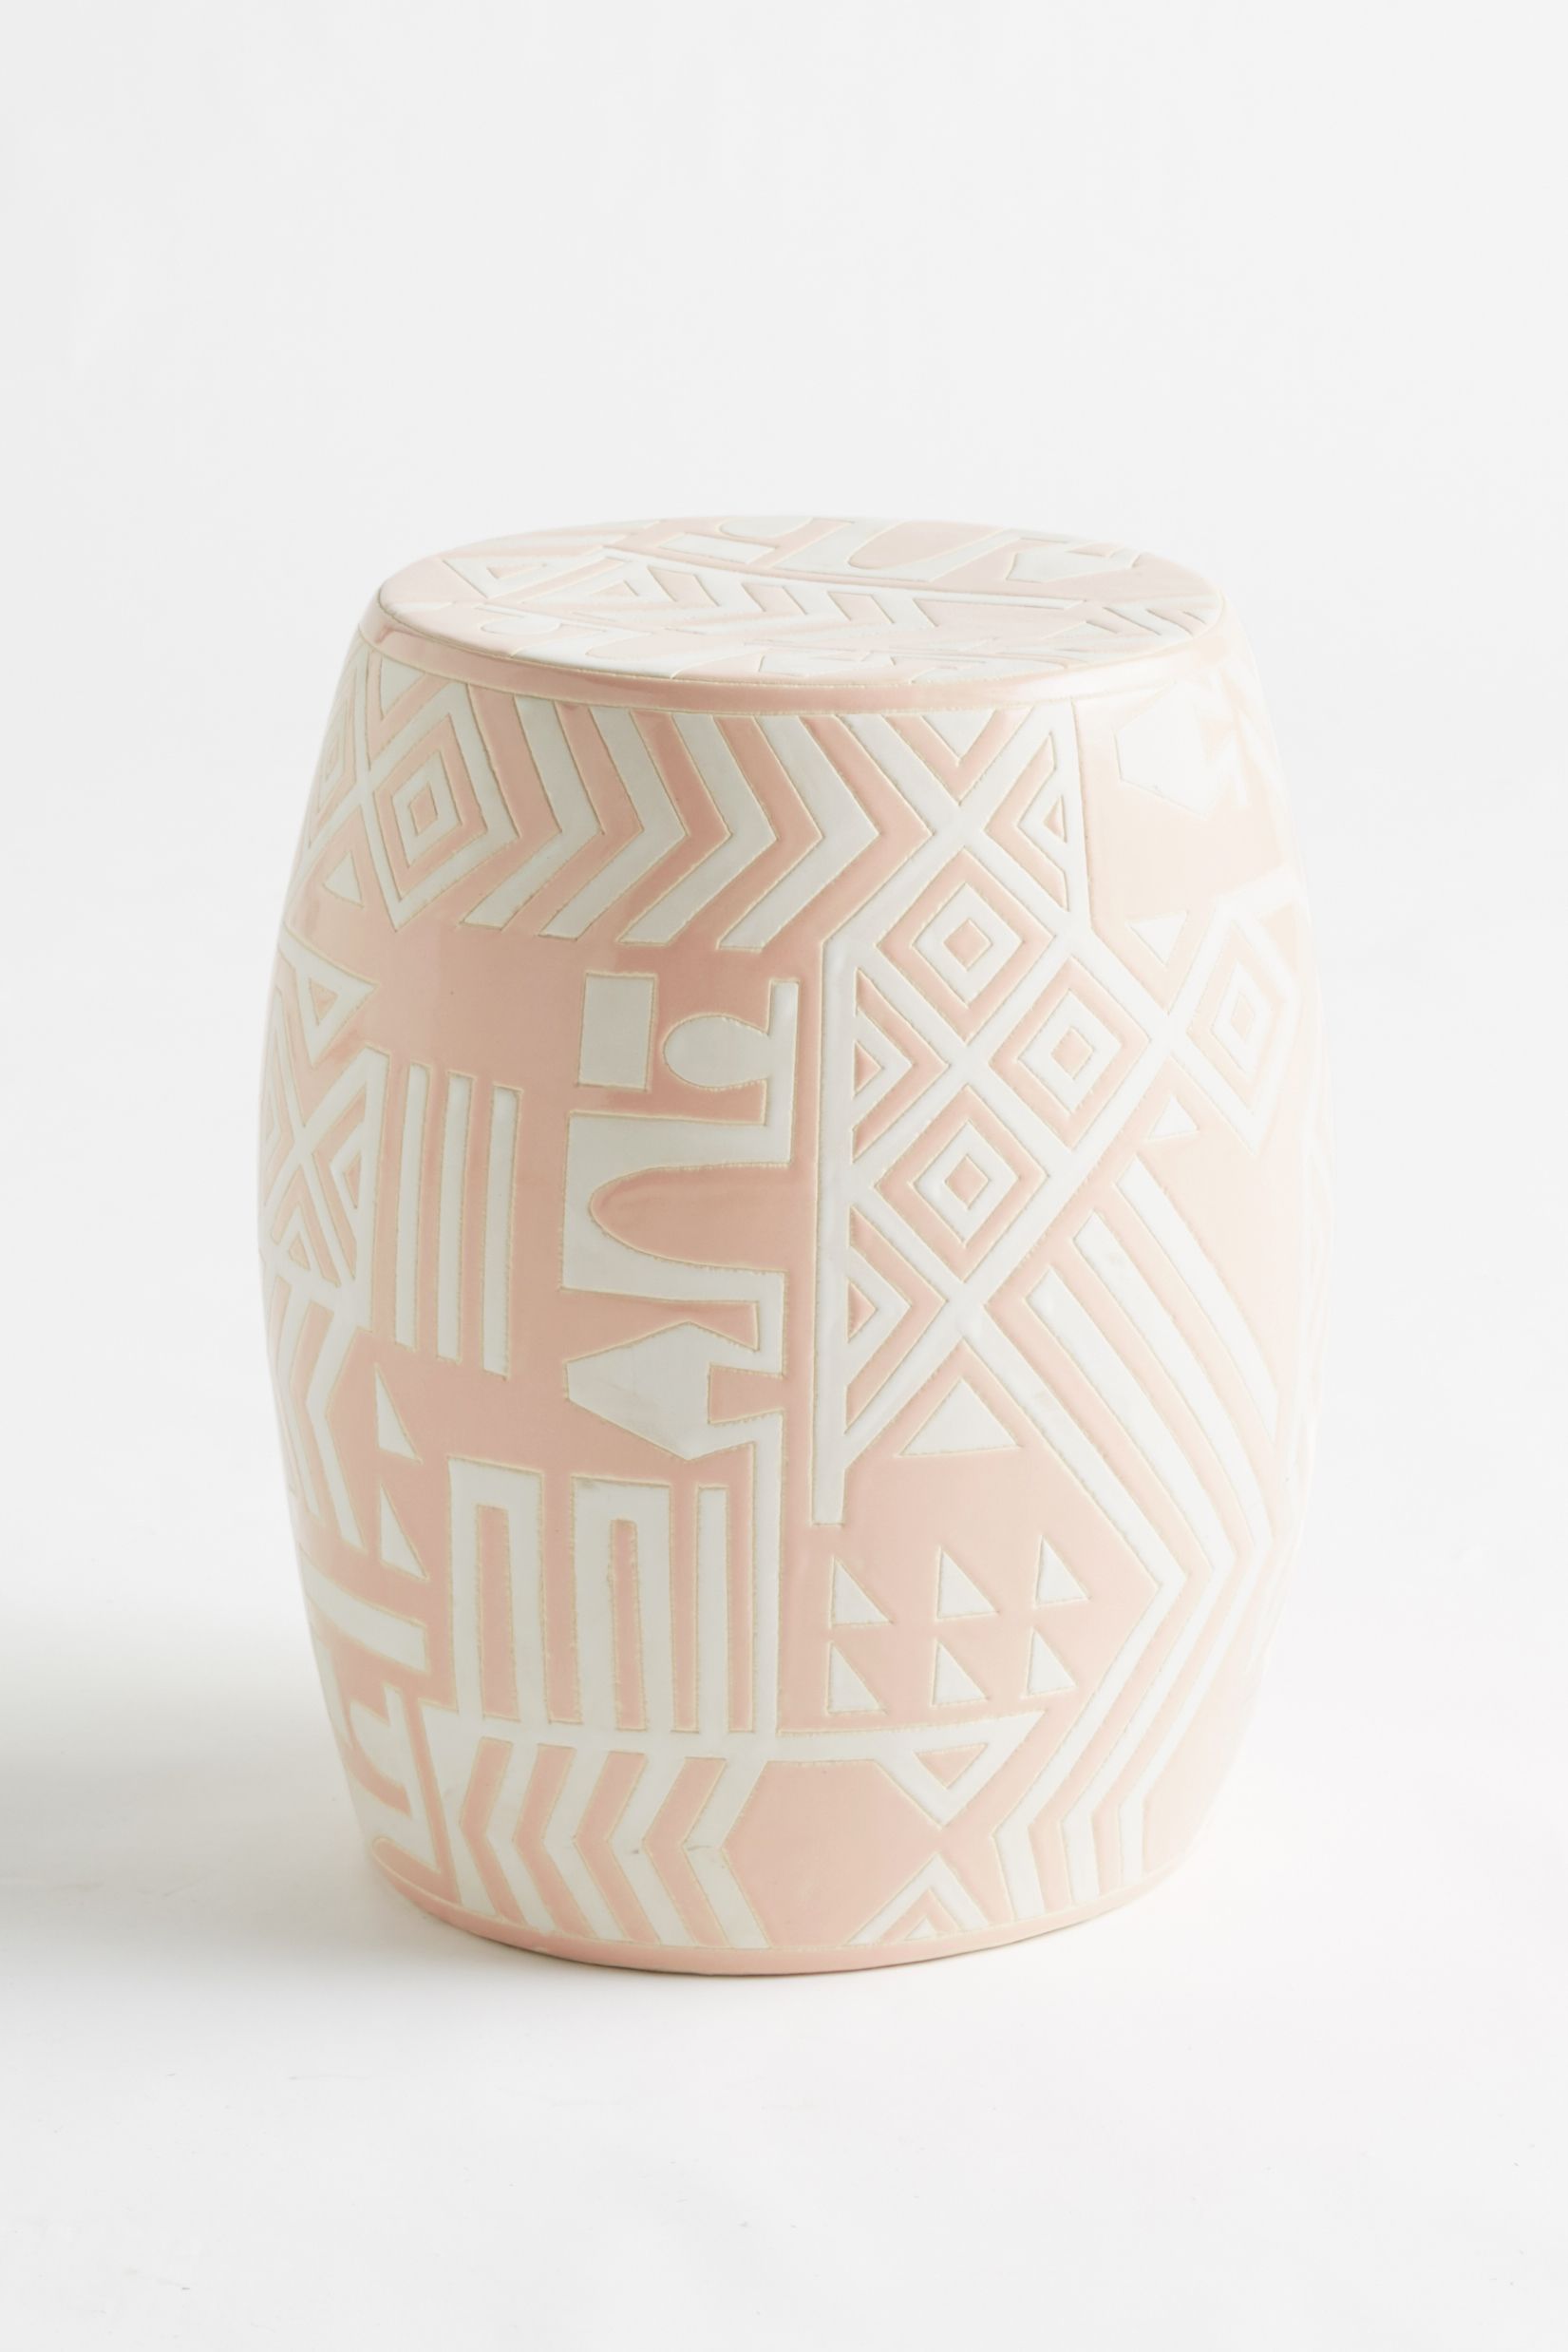 patterned anthropologie collection